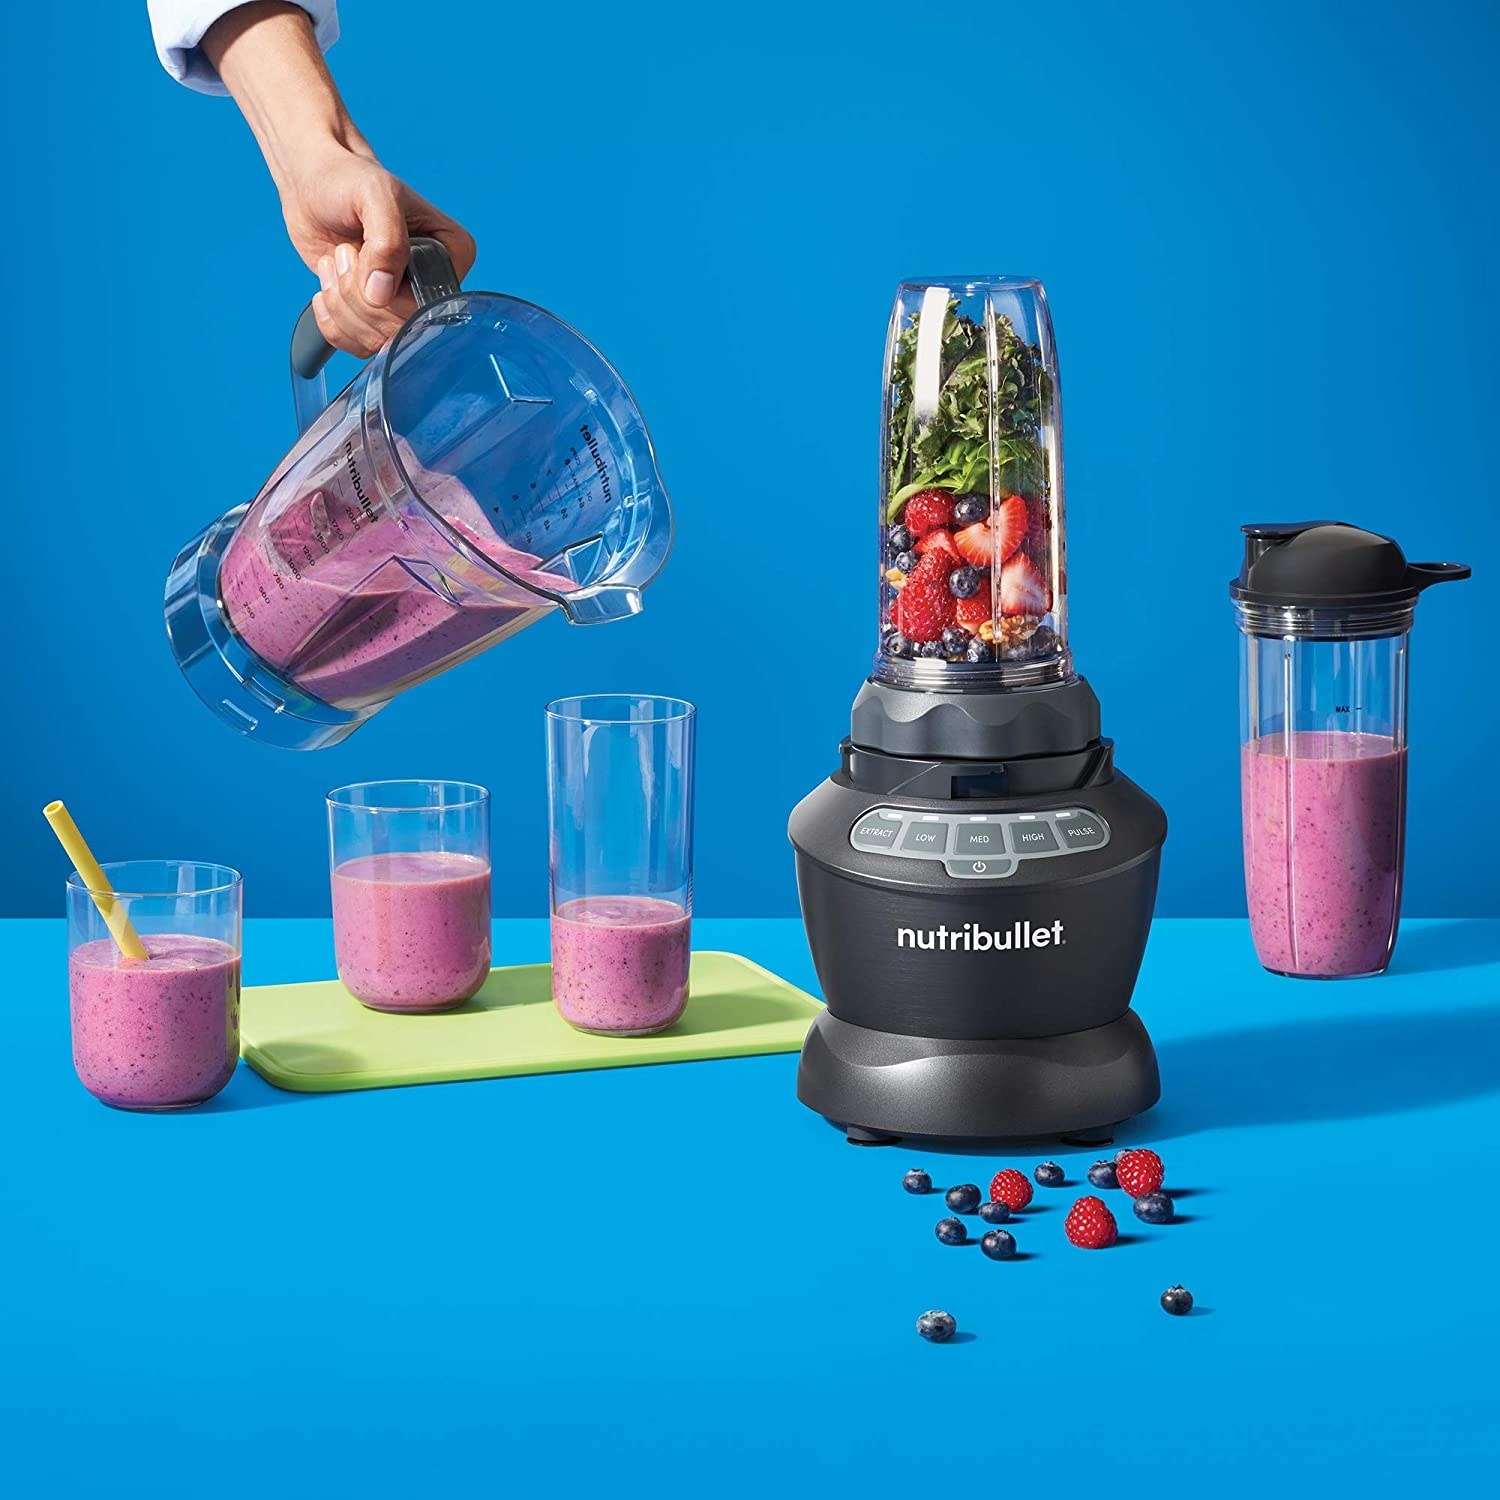 The blender set whipping up a smoothie